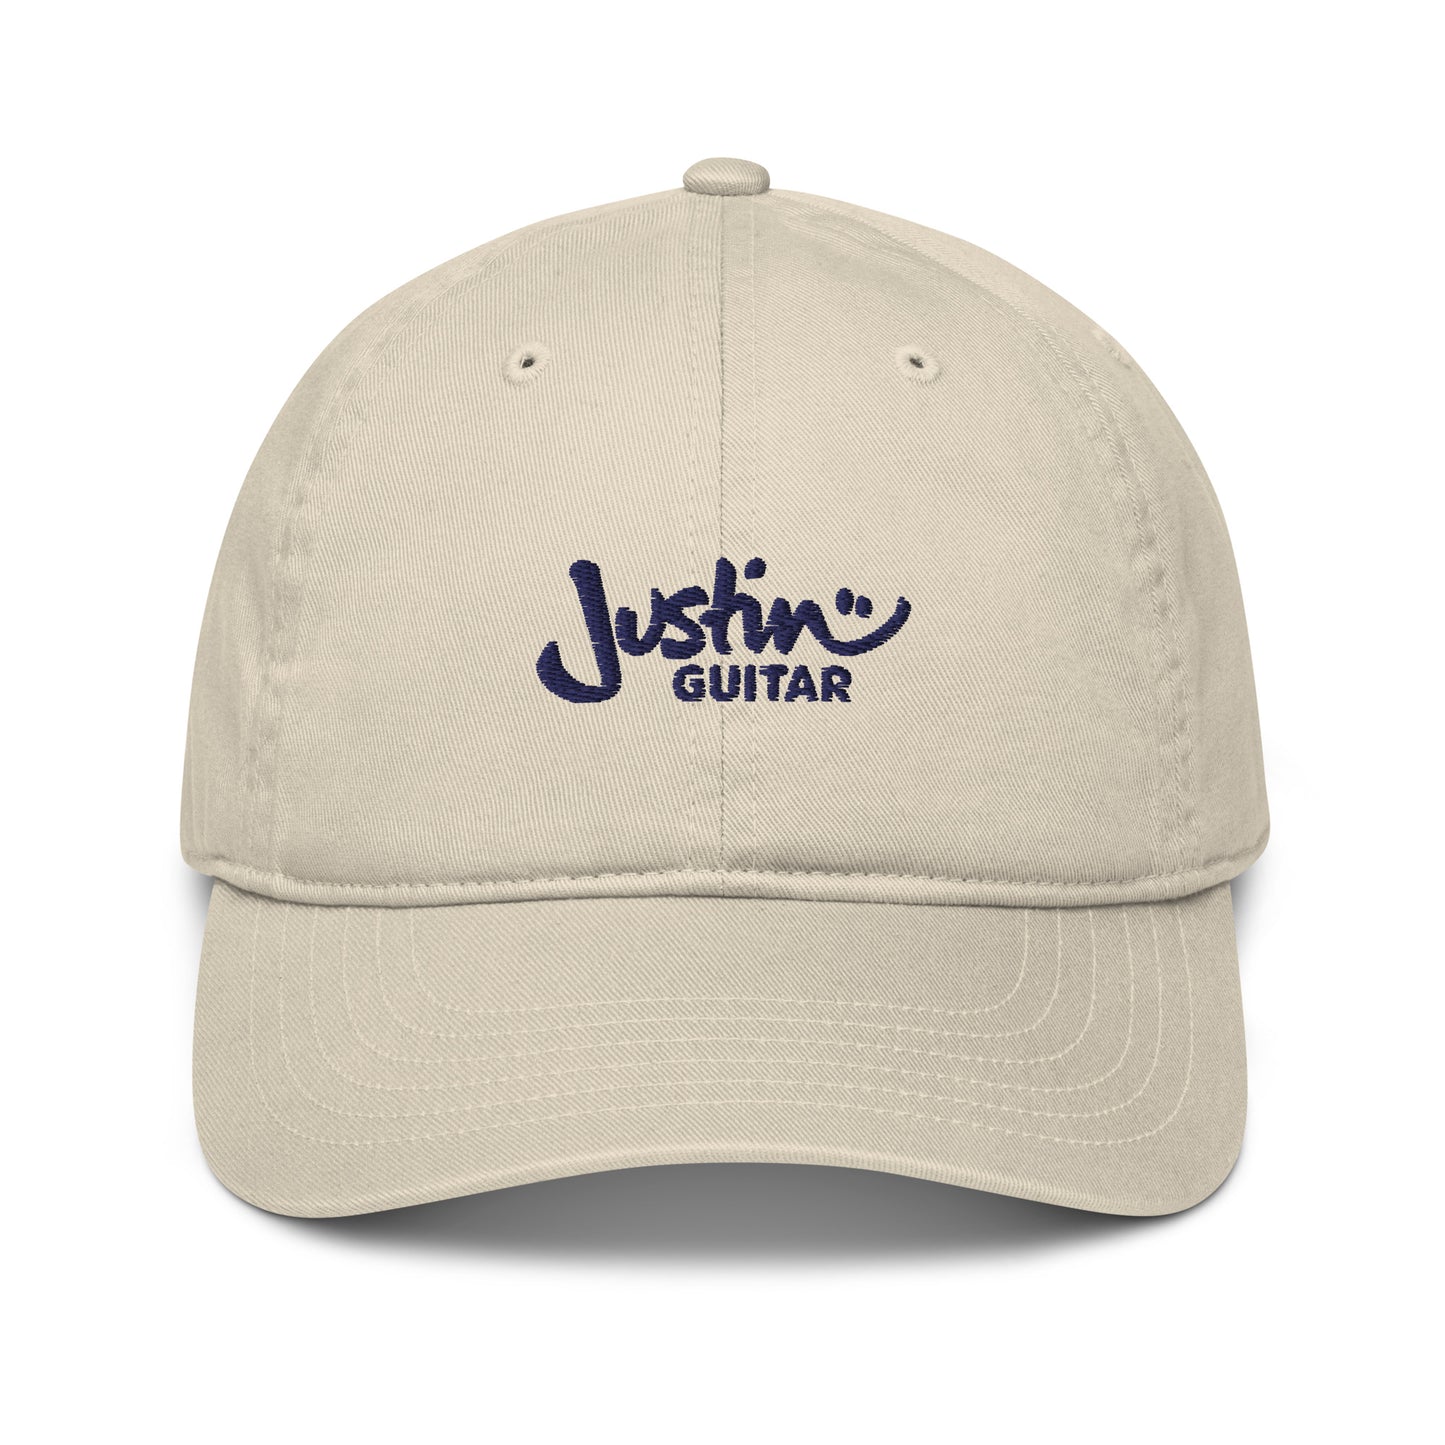 Beige baseball cap with JustinGuitar logo embroidered in the front. 